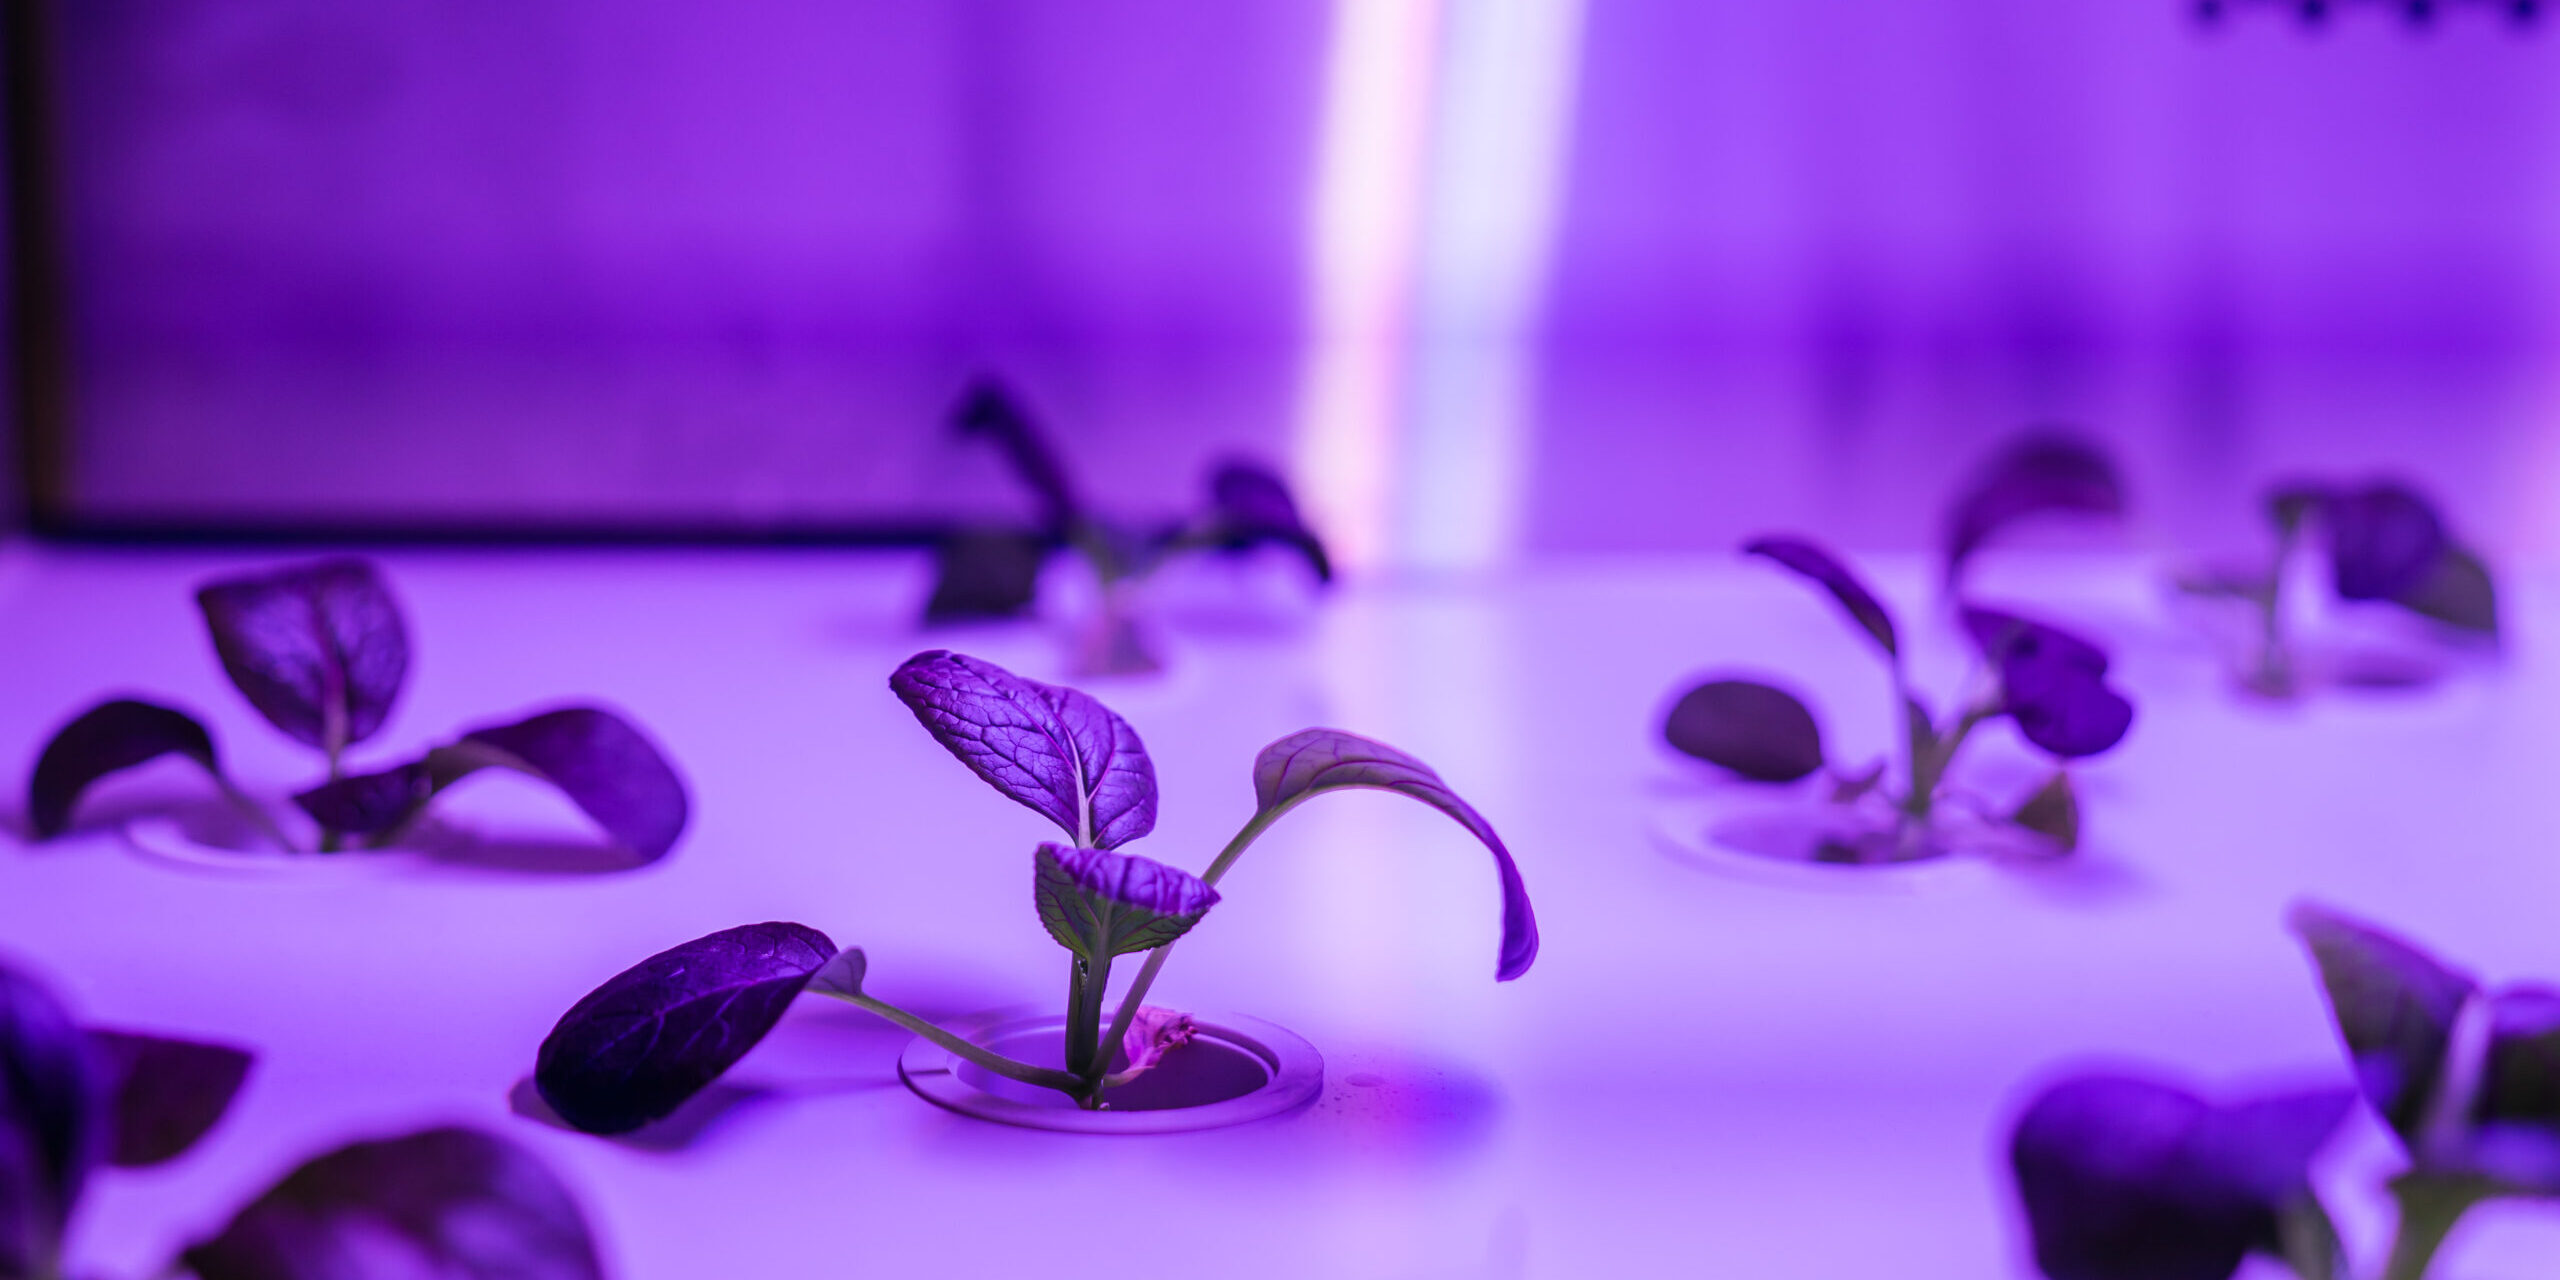 Organic hydroponic vegetable grow with LED Light Indoor farm, Agriculture Technology.